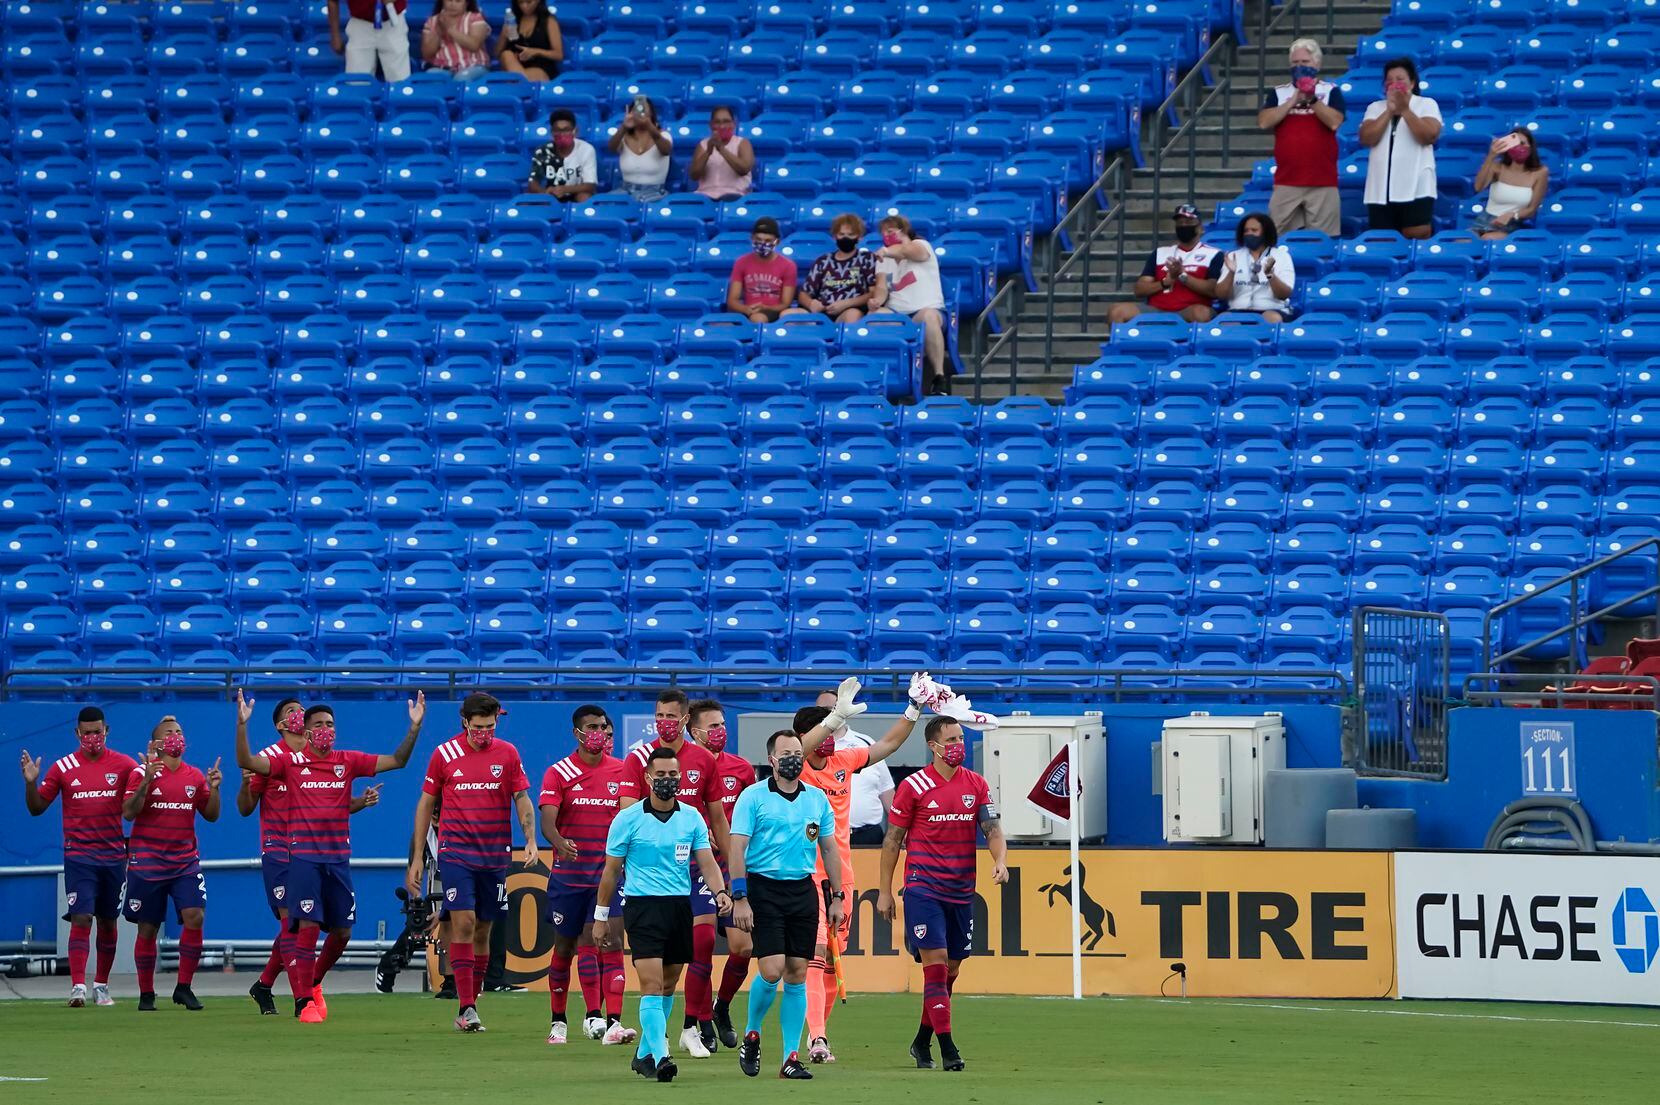 FC Dallas player acknowledge supporters as they take the field before an MLS soccer game against the Nashville SC at Toyota Stadium on Wednesday, Aug. 12, 2020, in Frisco, Texas. (Smiley N. Pool/The Dallas Morning News)